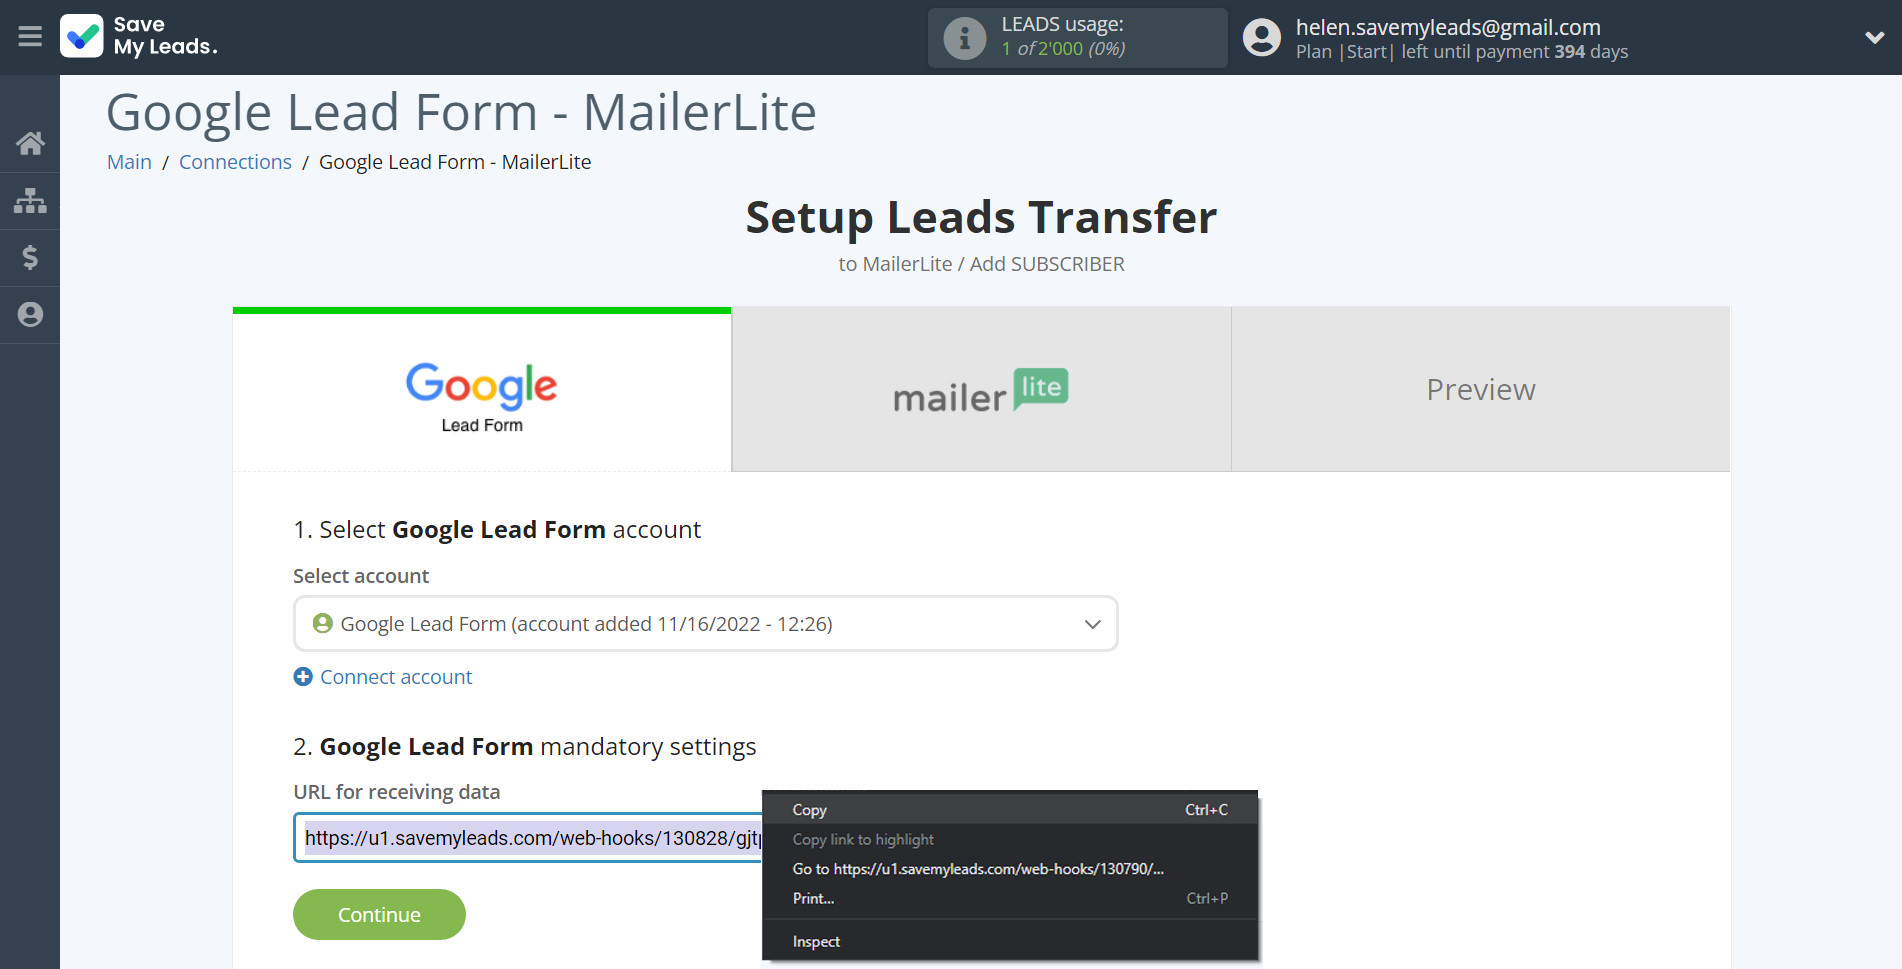 How to Connect Google Lead Form with MailerLite | Data Source account connection